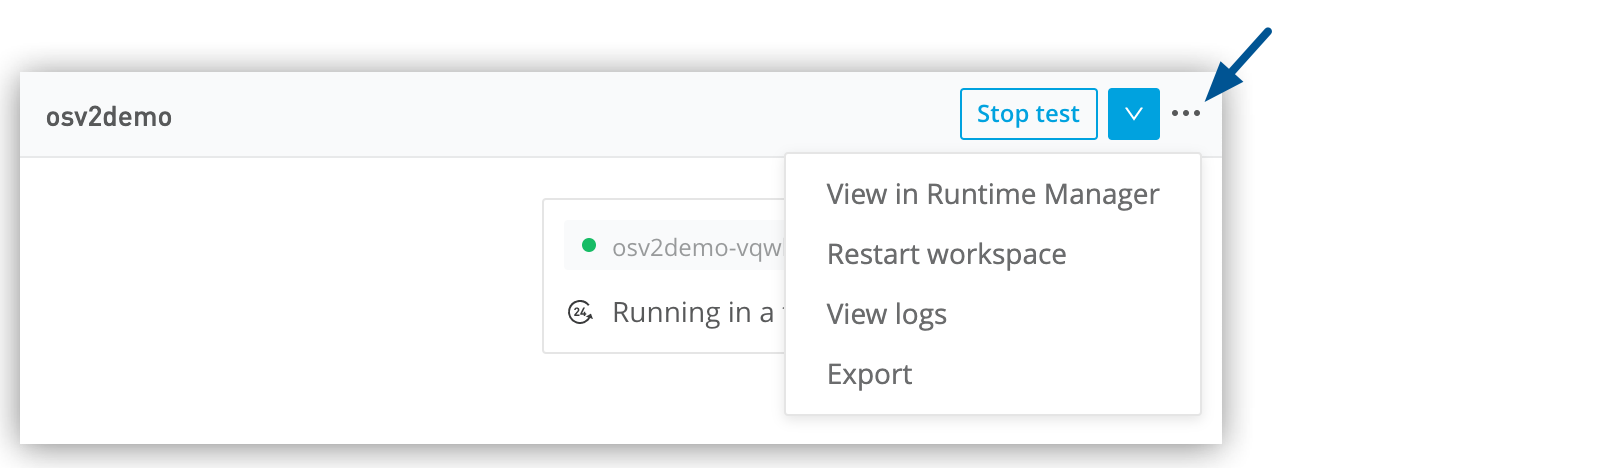 [View in Runtime Manager (Runtime Manager で表示)] メニューオプション